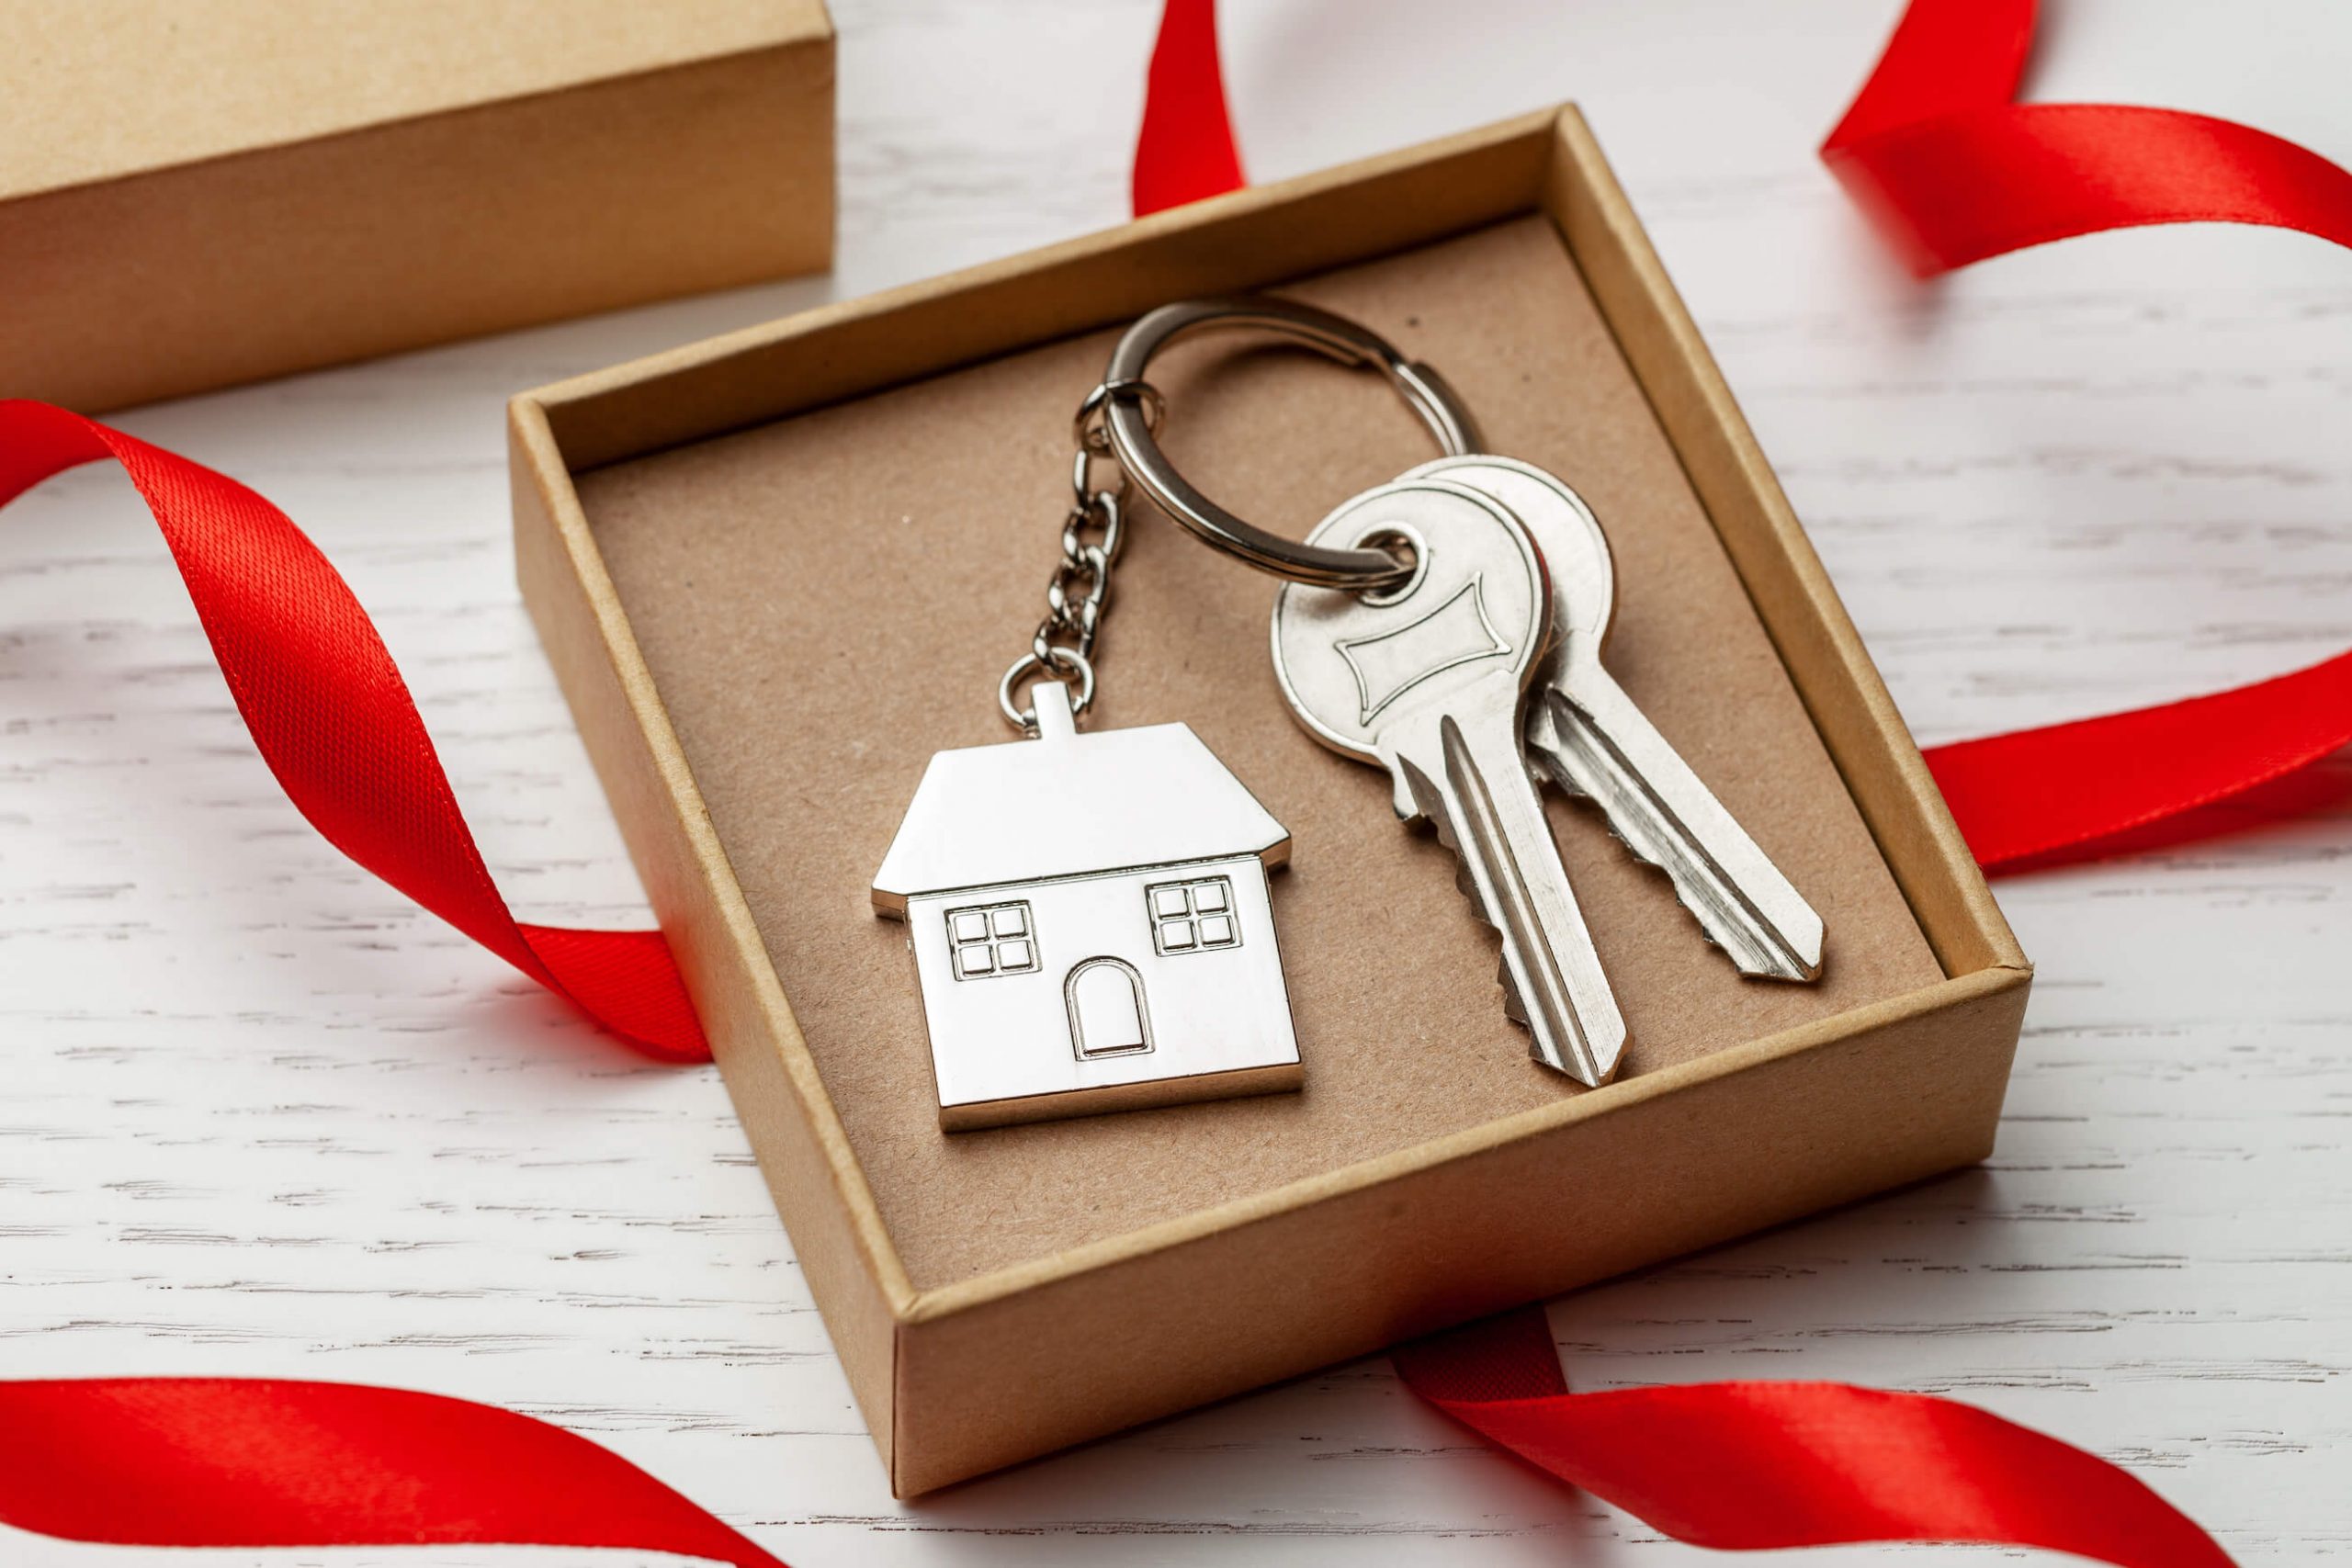 New home keys after selling your property